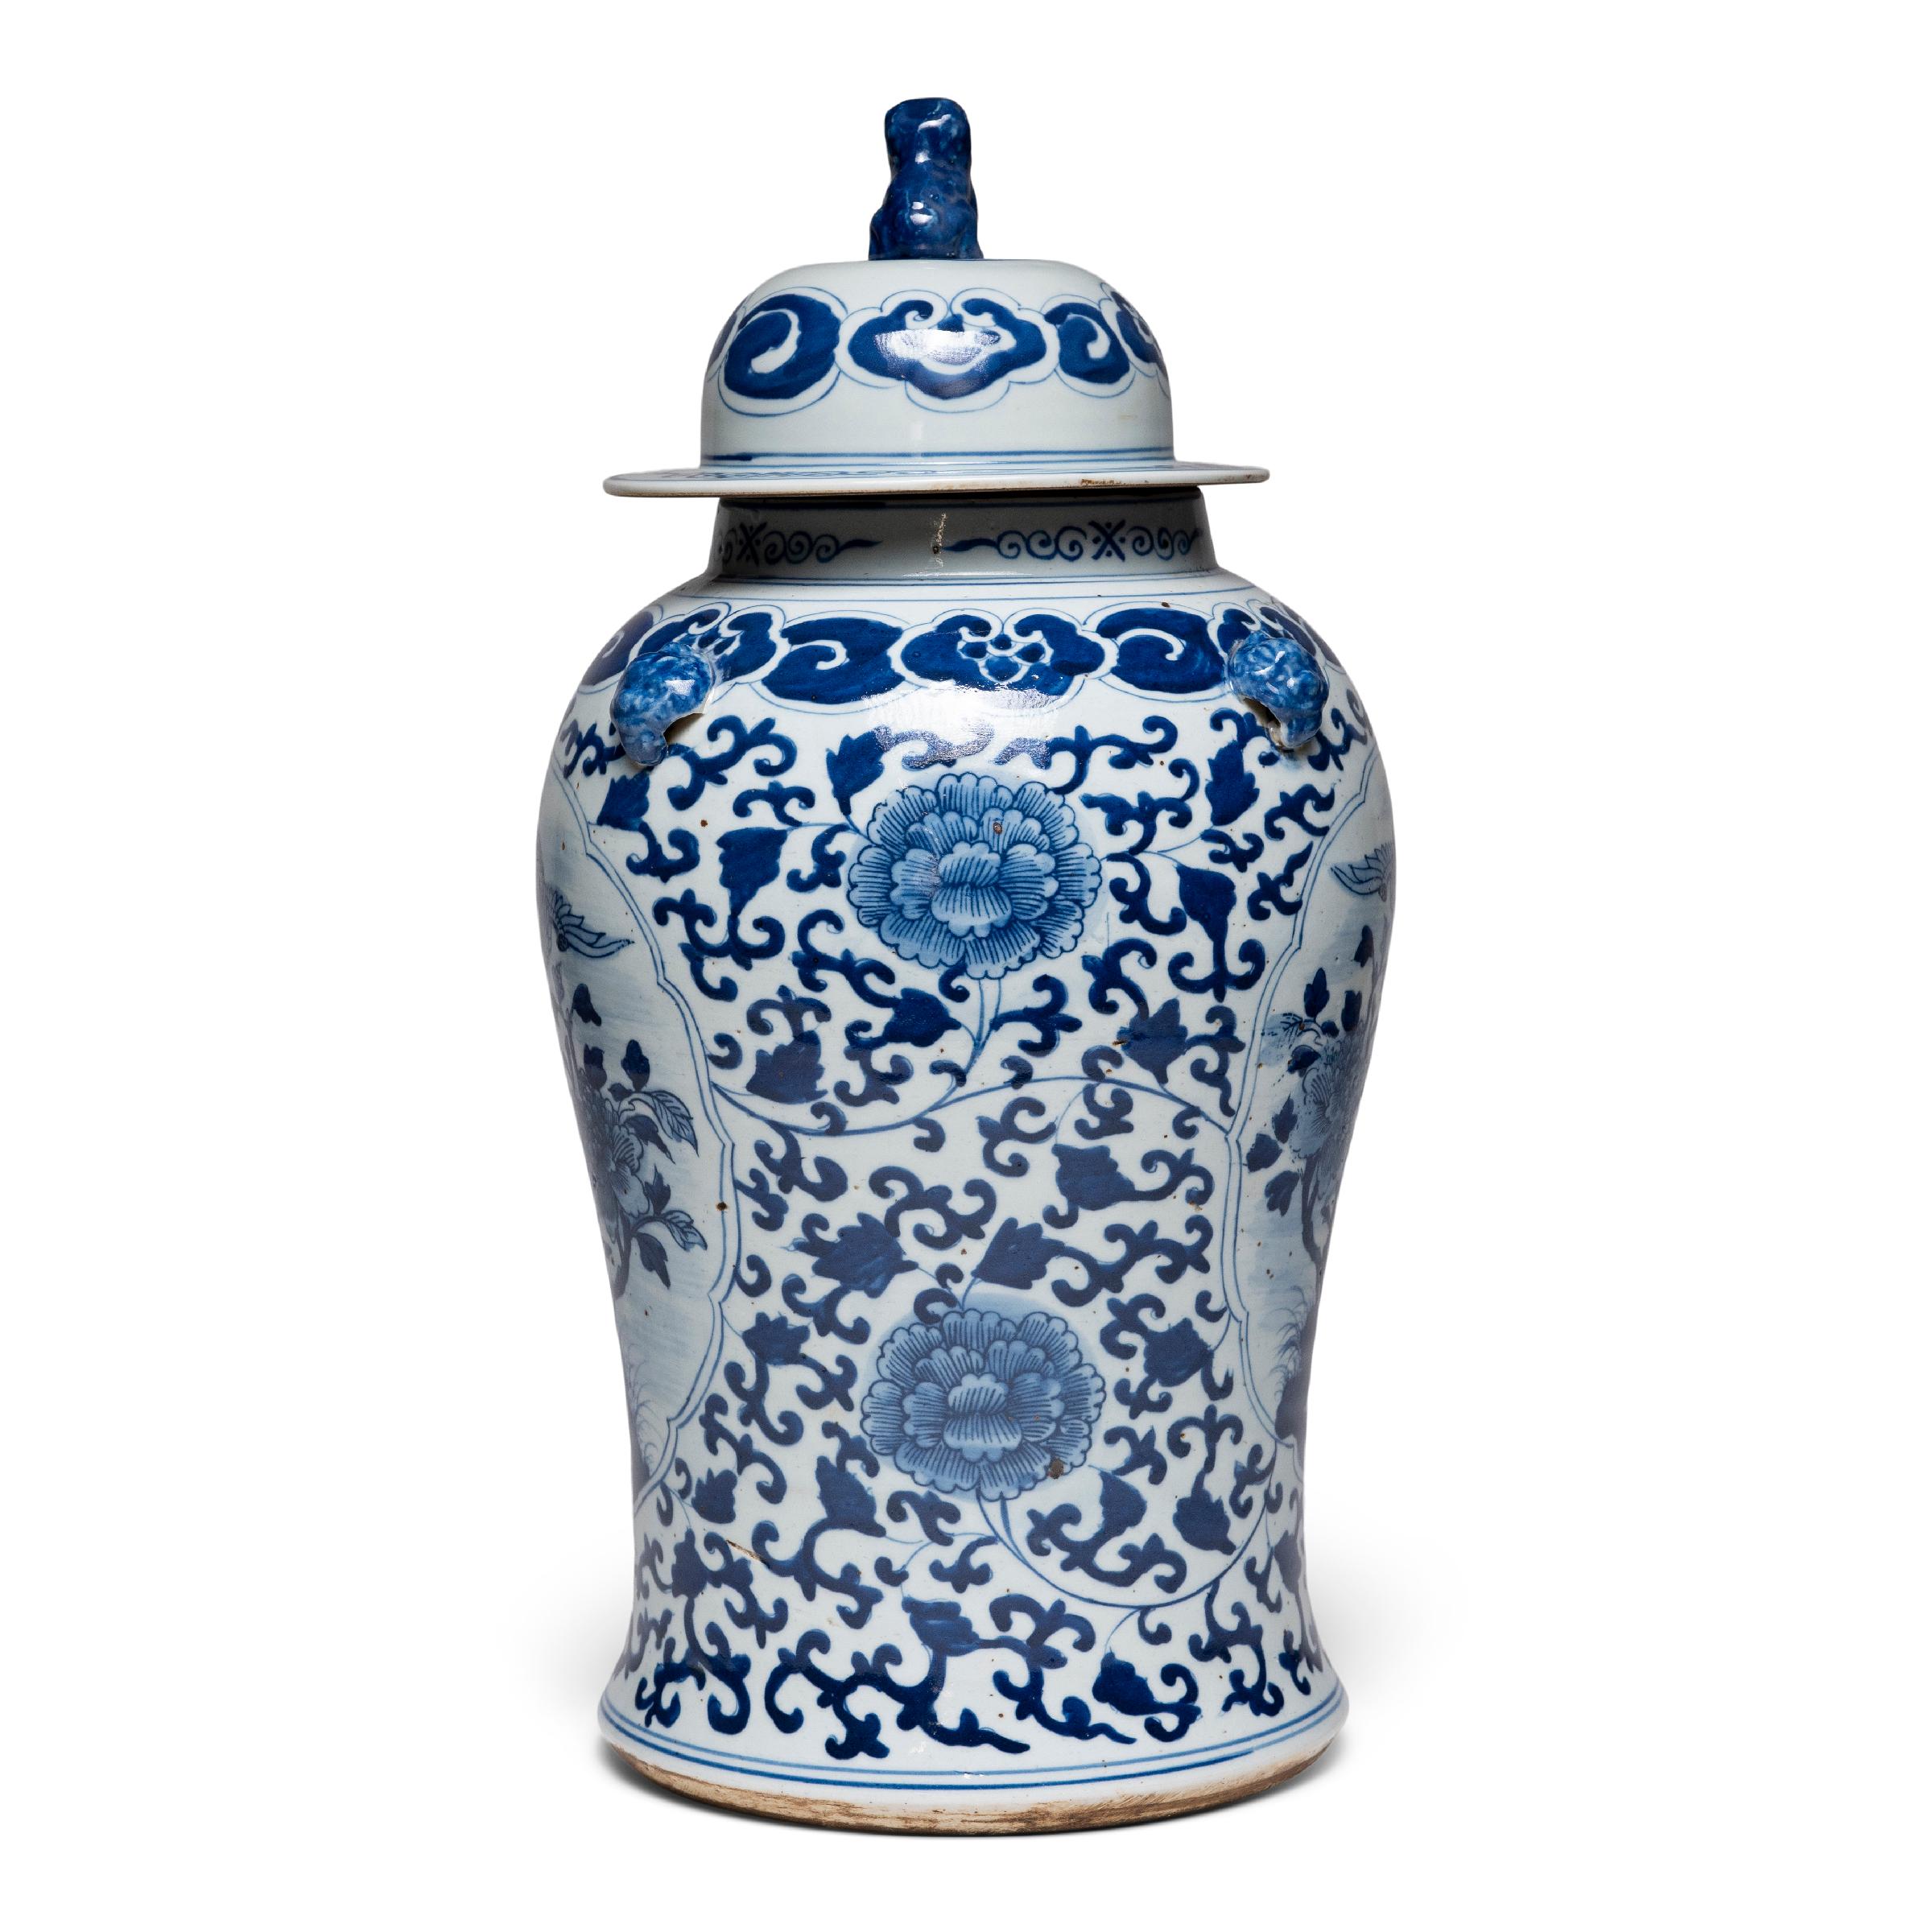 This contemporary lidded baluster jar continues the centuries-old tradition of Chinese blue-and-white porcelain ware. Painted with cobalt pigments for a brilliant blue finish, the jar is densely patterned with trailing vine scrollwork and peony